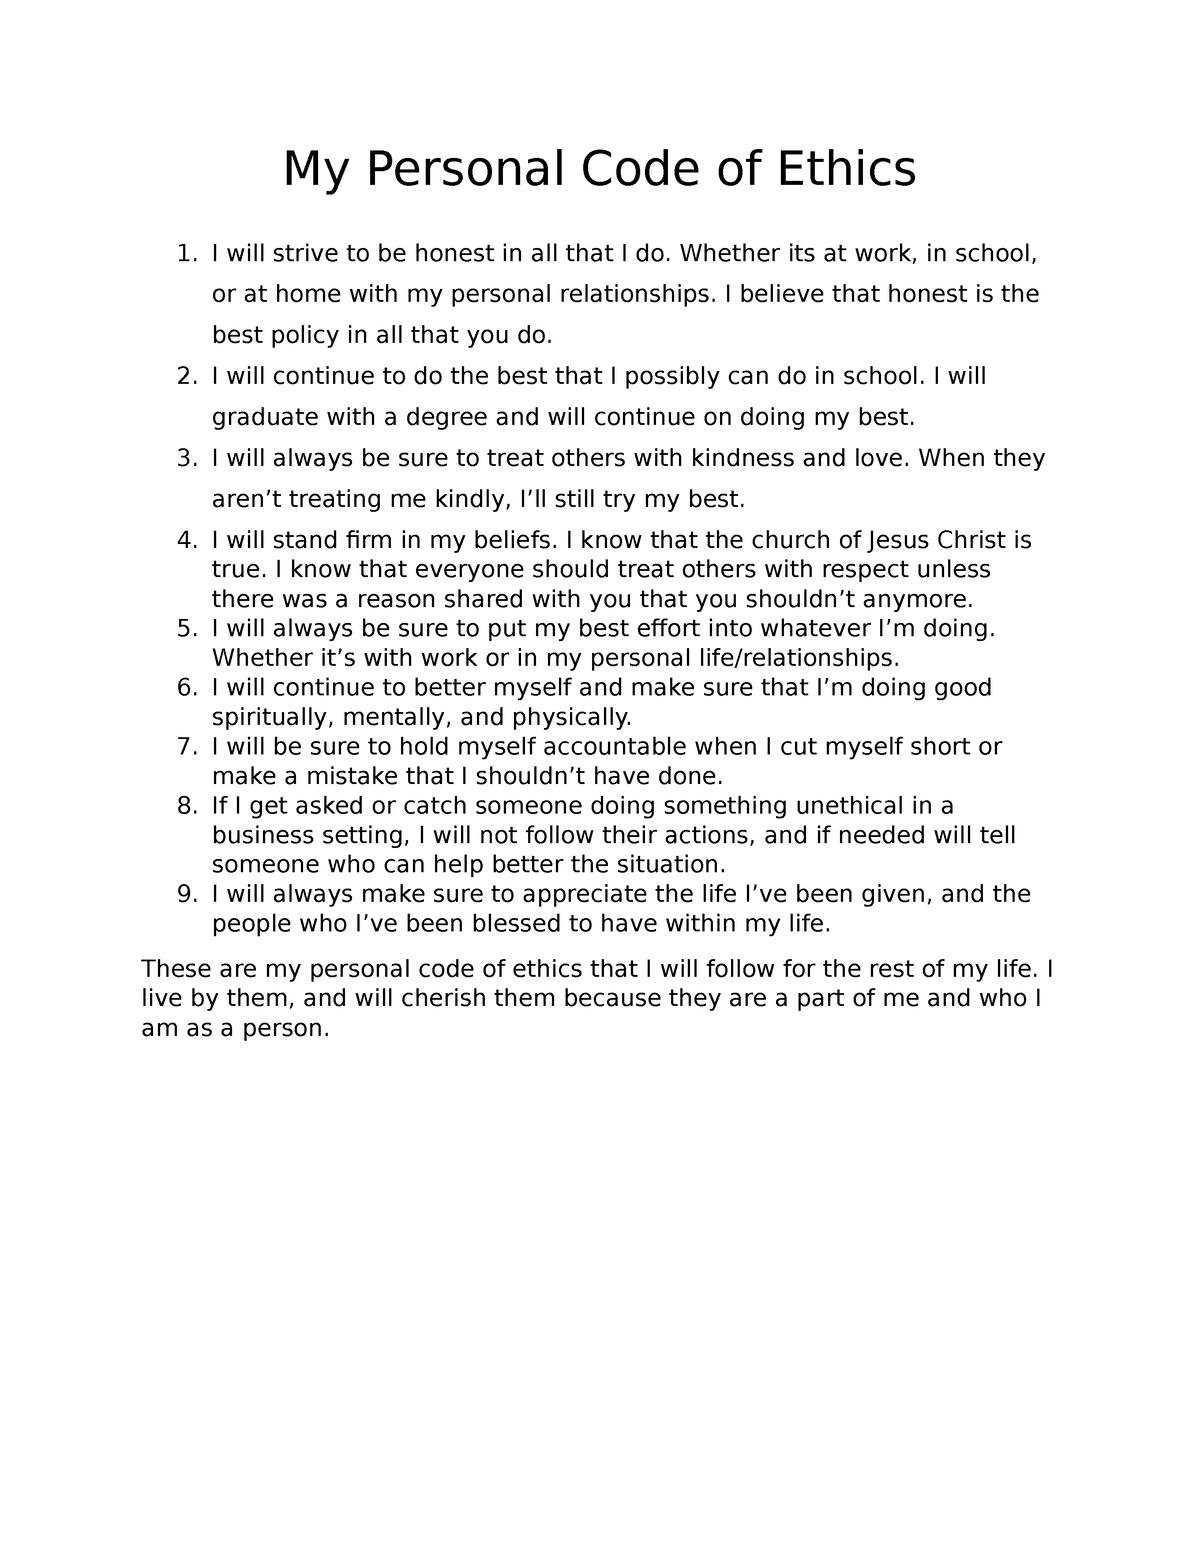 personal code of ethics essay examples